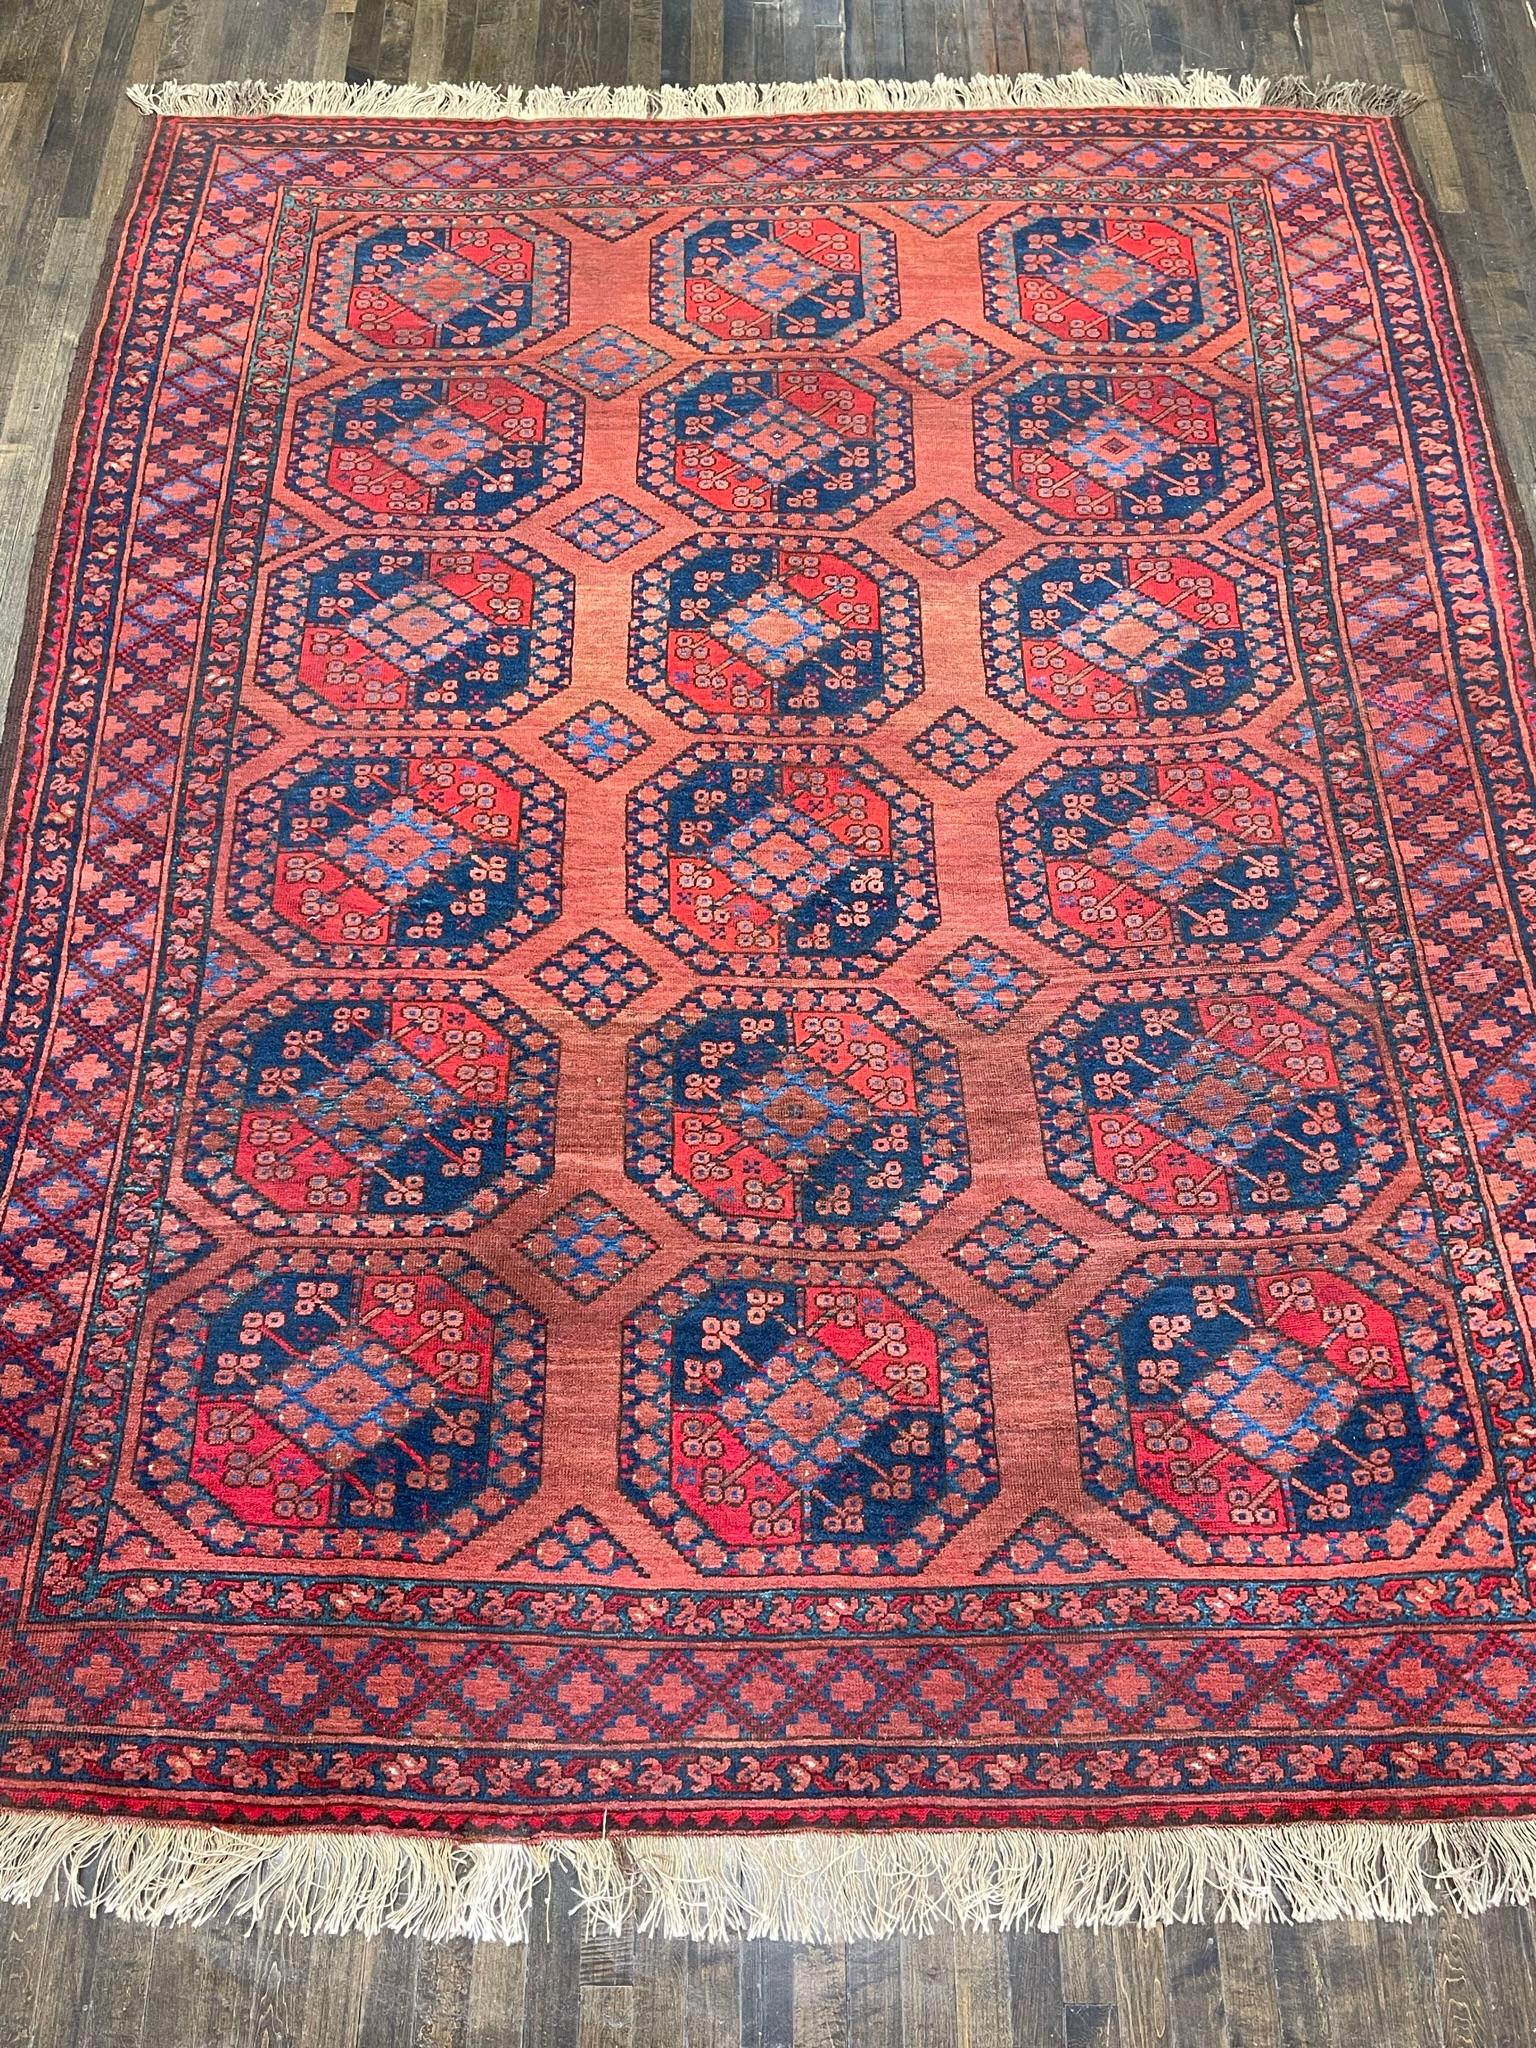 This rug is hand woven in Afghanistan. Known as Ersari these Turkaman woven rugs dates back many centuries.Ersari rugs were made with a lustrous wool that could absorb vegetable dyes superbly. The guls on the well-preserved Ersari carpets are known